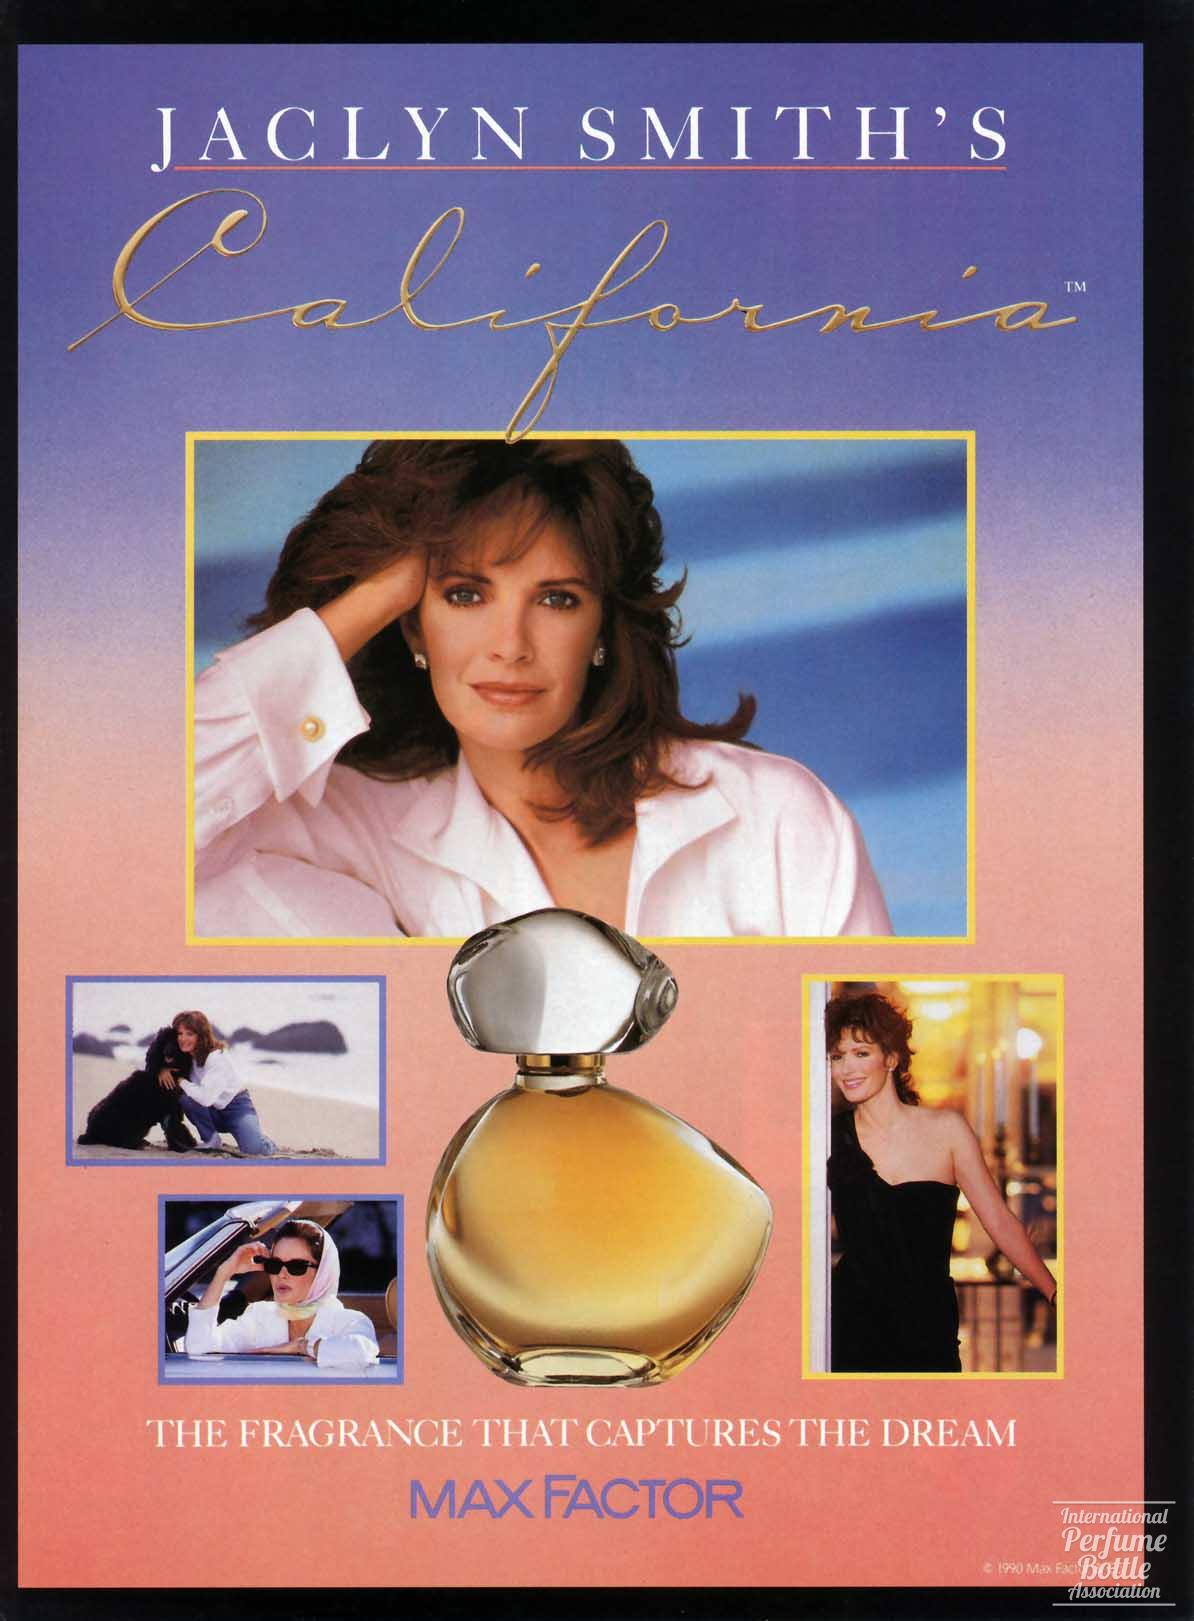 "Jaclyn Smith's California" by Max Factor Advertisement - 1991